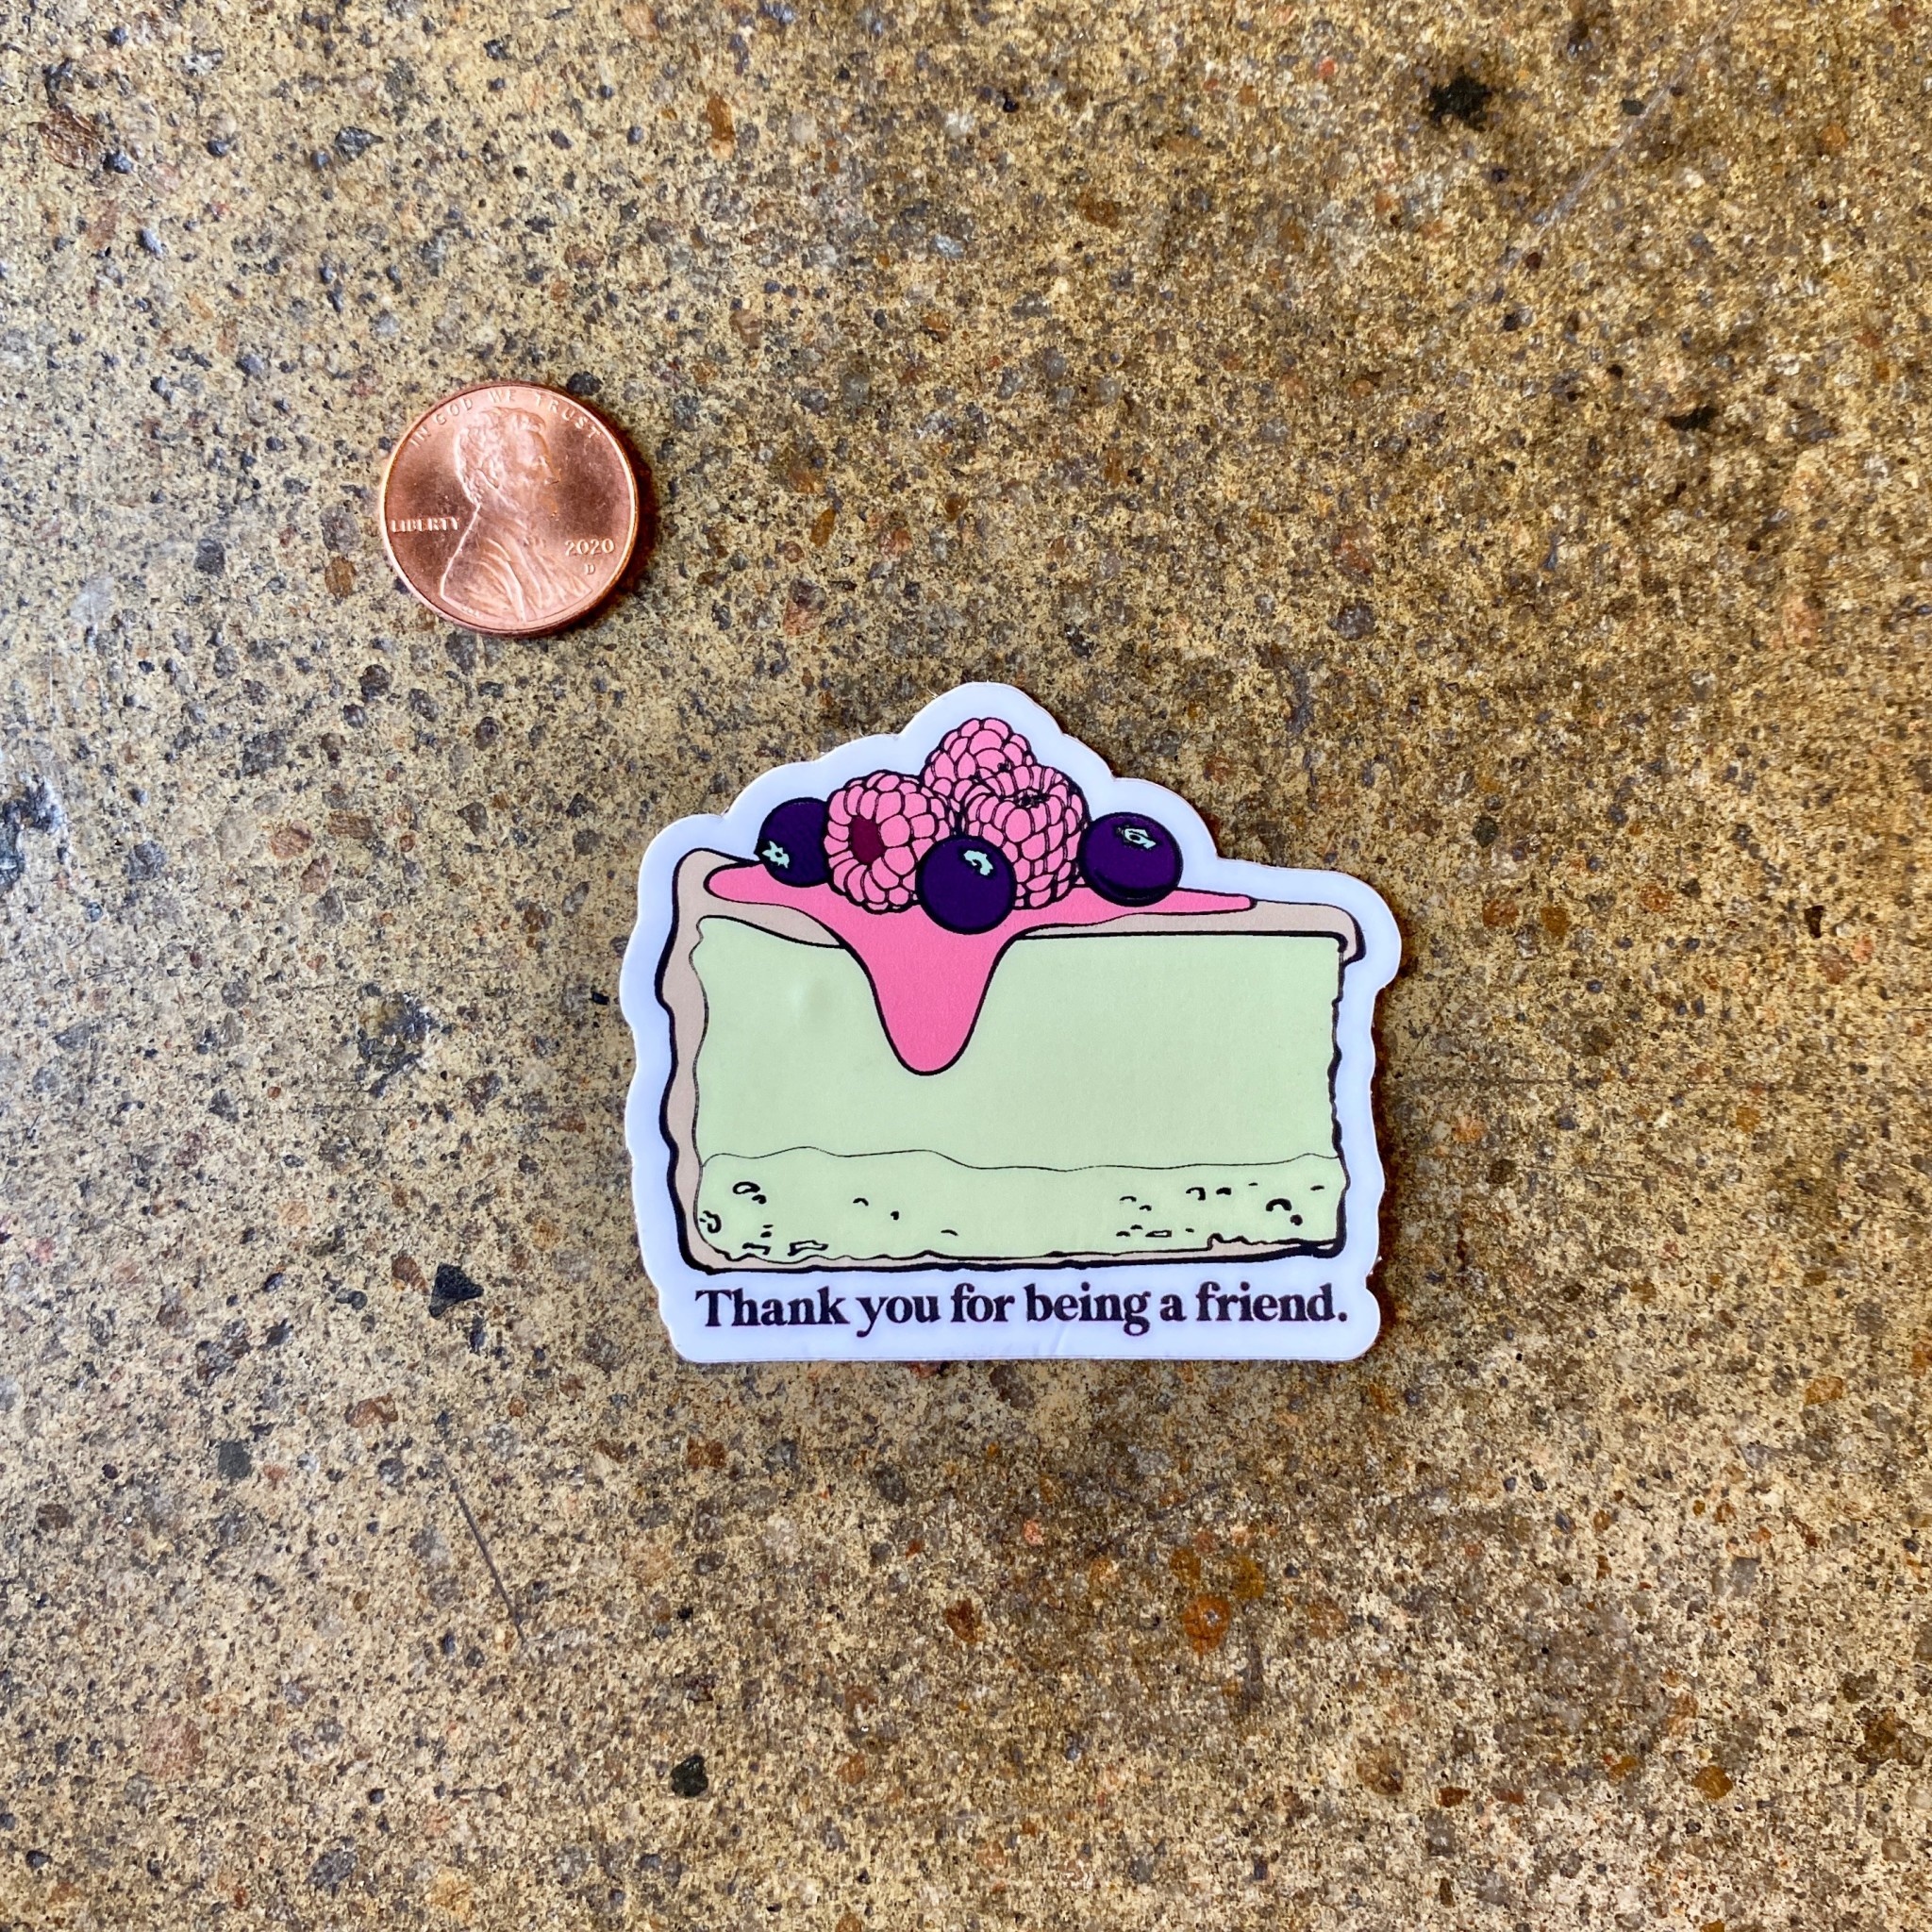 What's His Name Cheesecake Friend Sticker